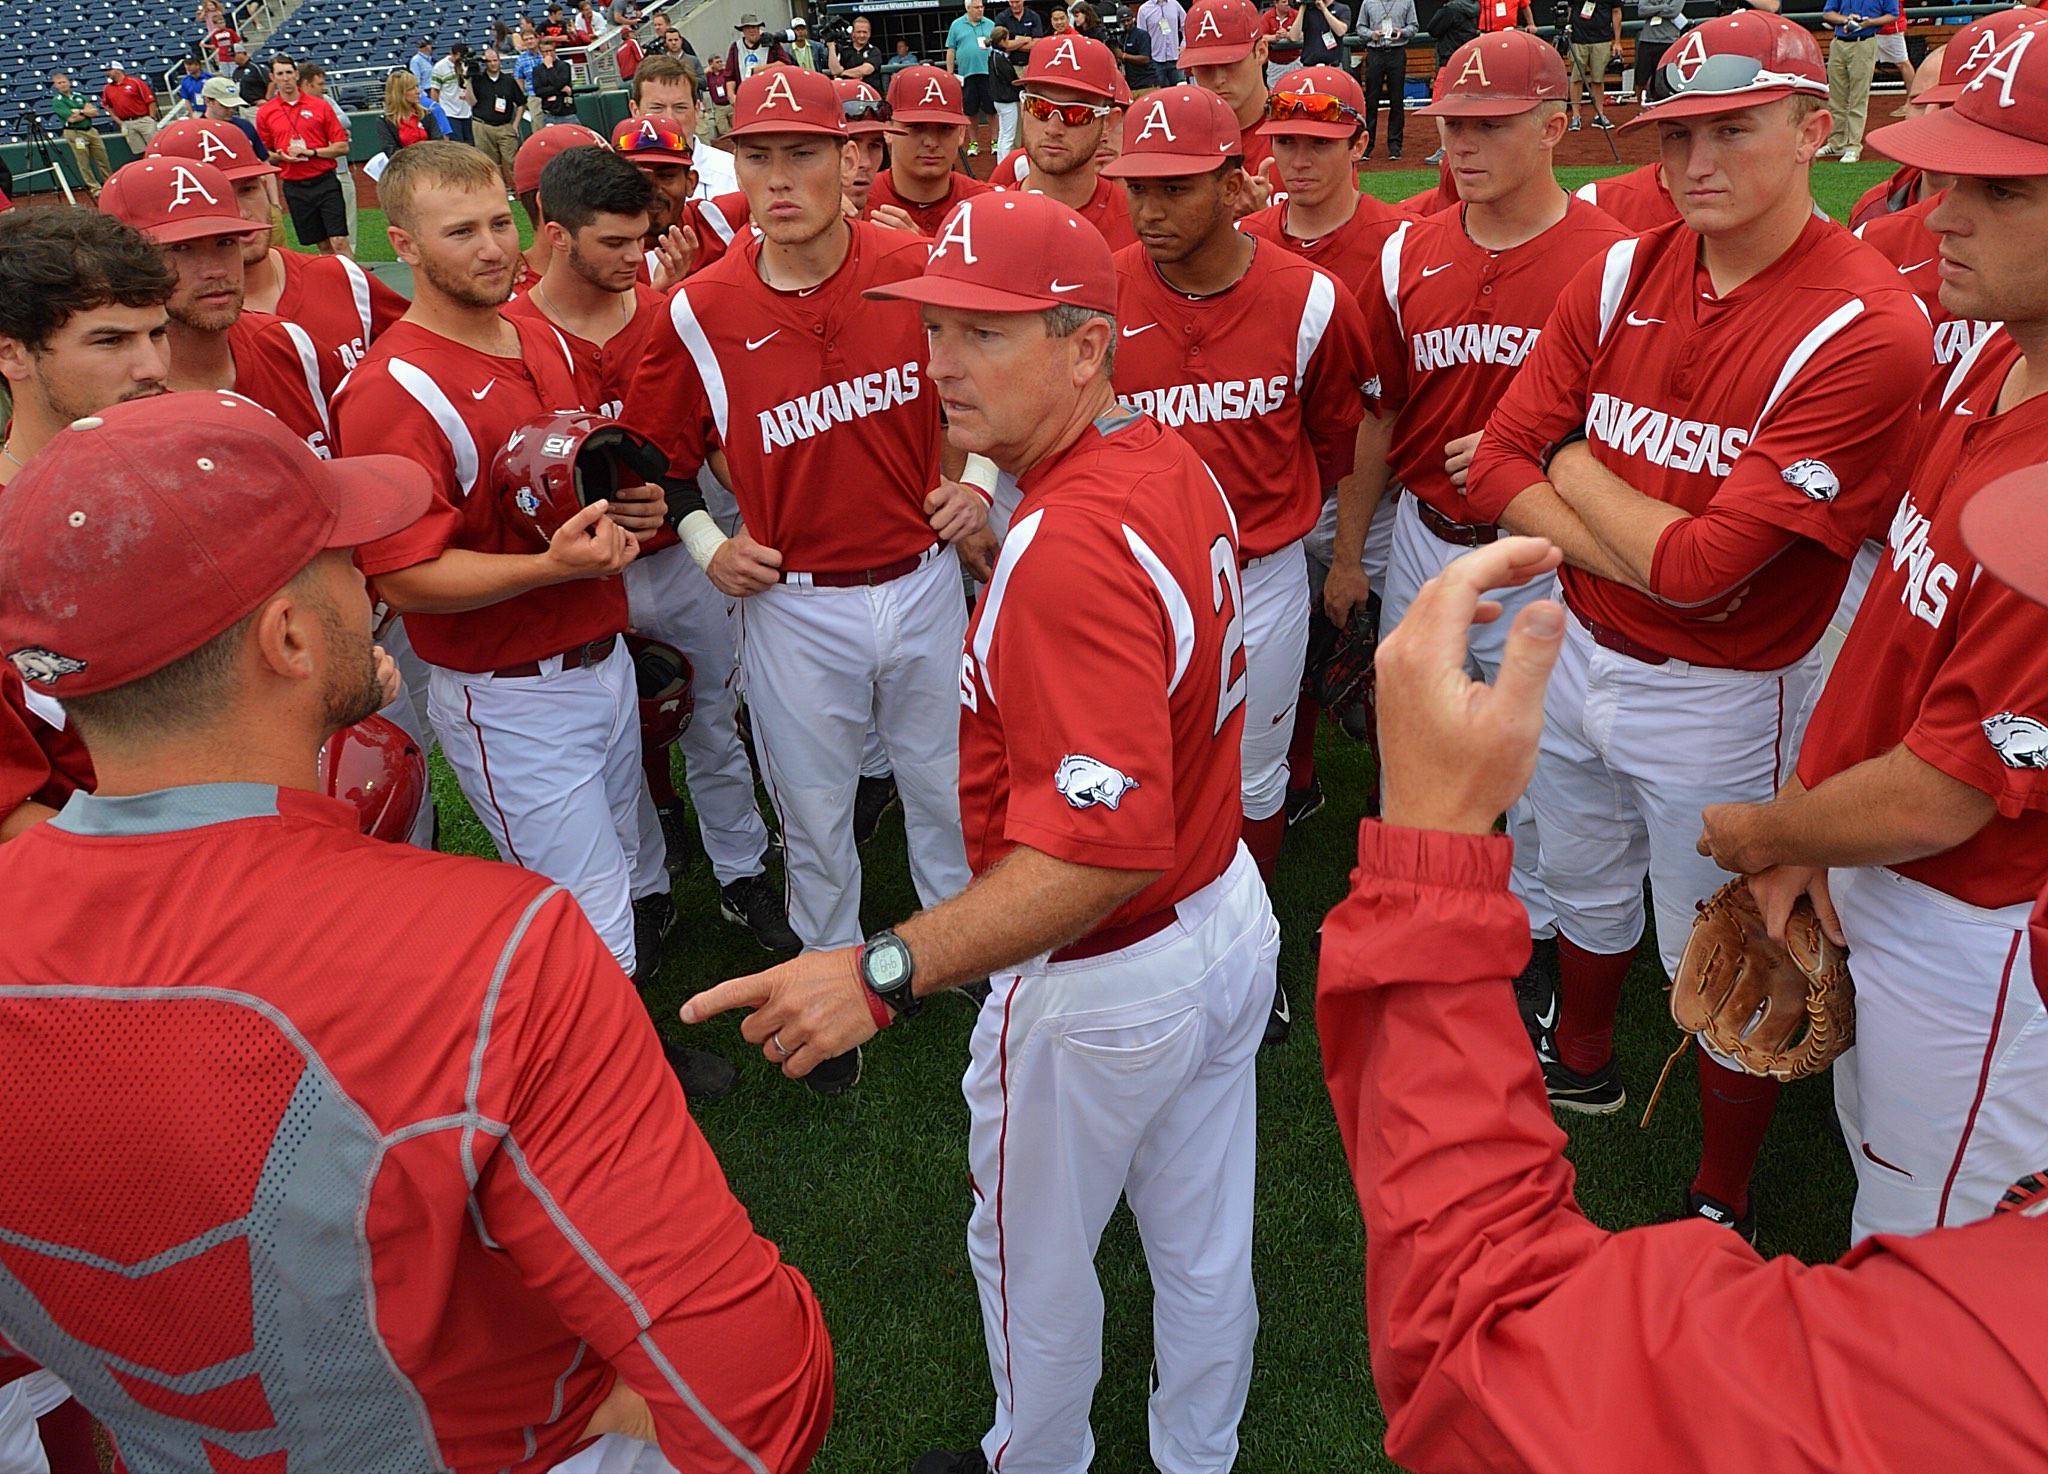 Razorback Baseball on Twitter "PREVIEW As we open our 8th CWS in